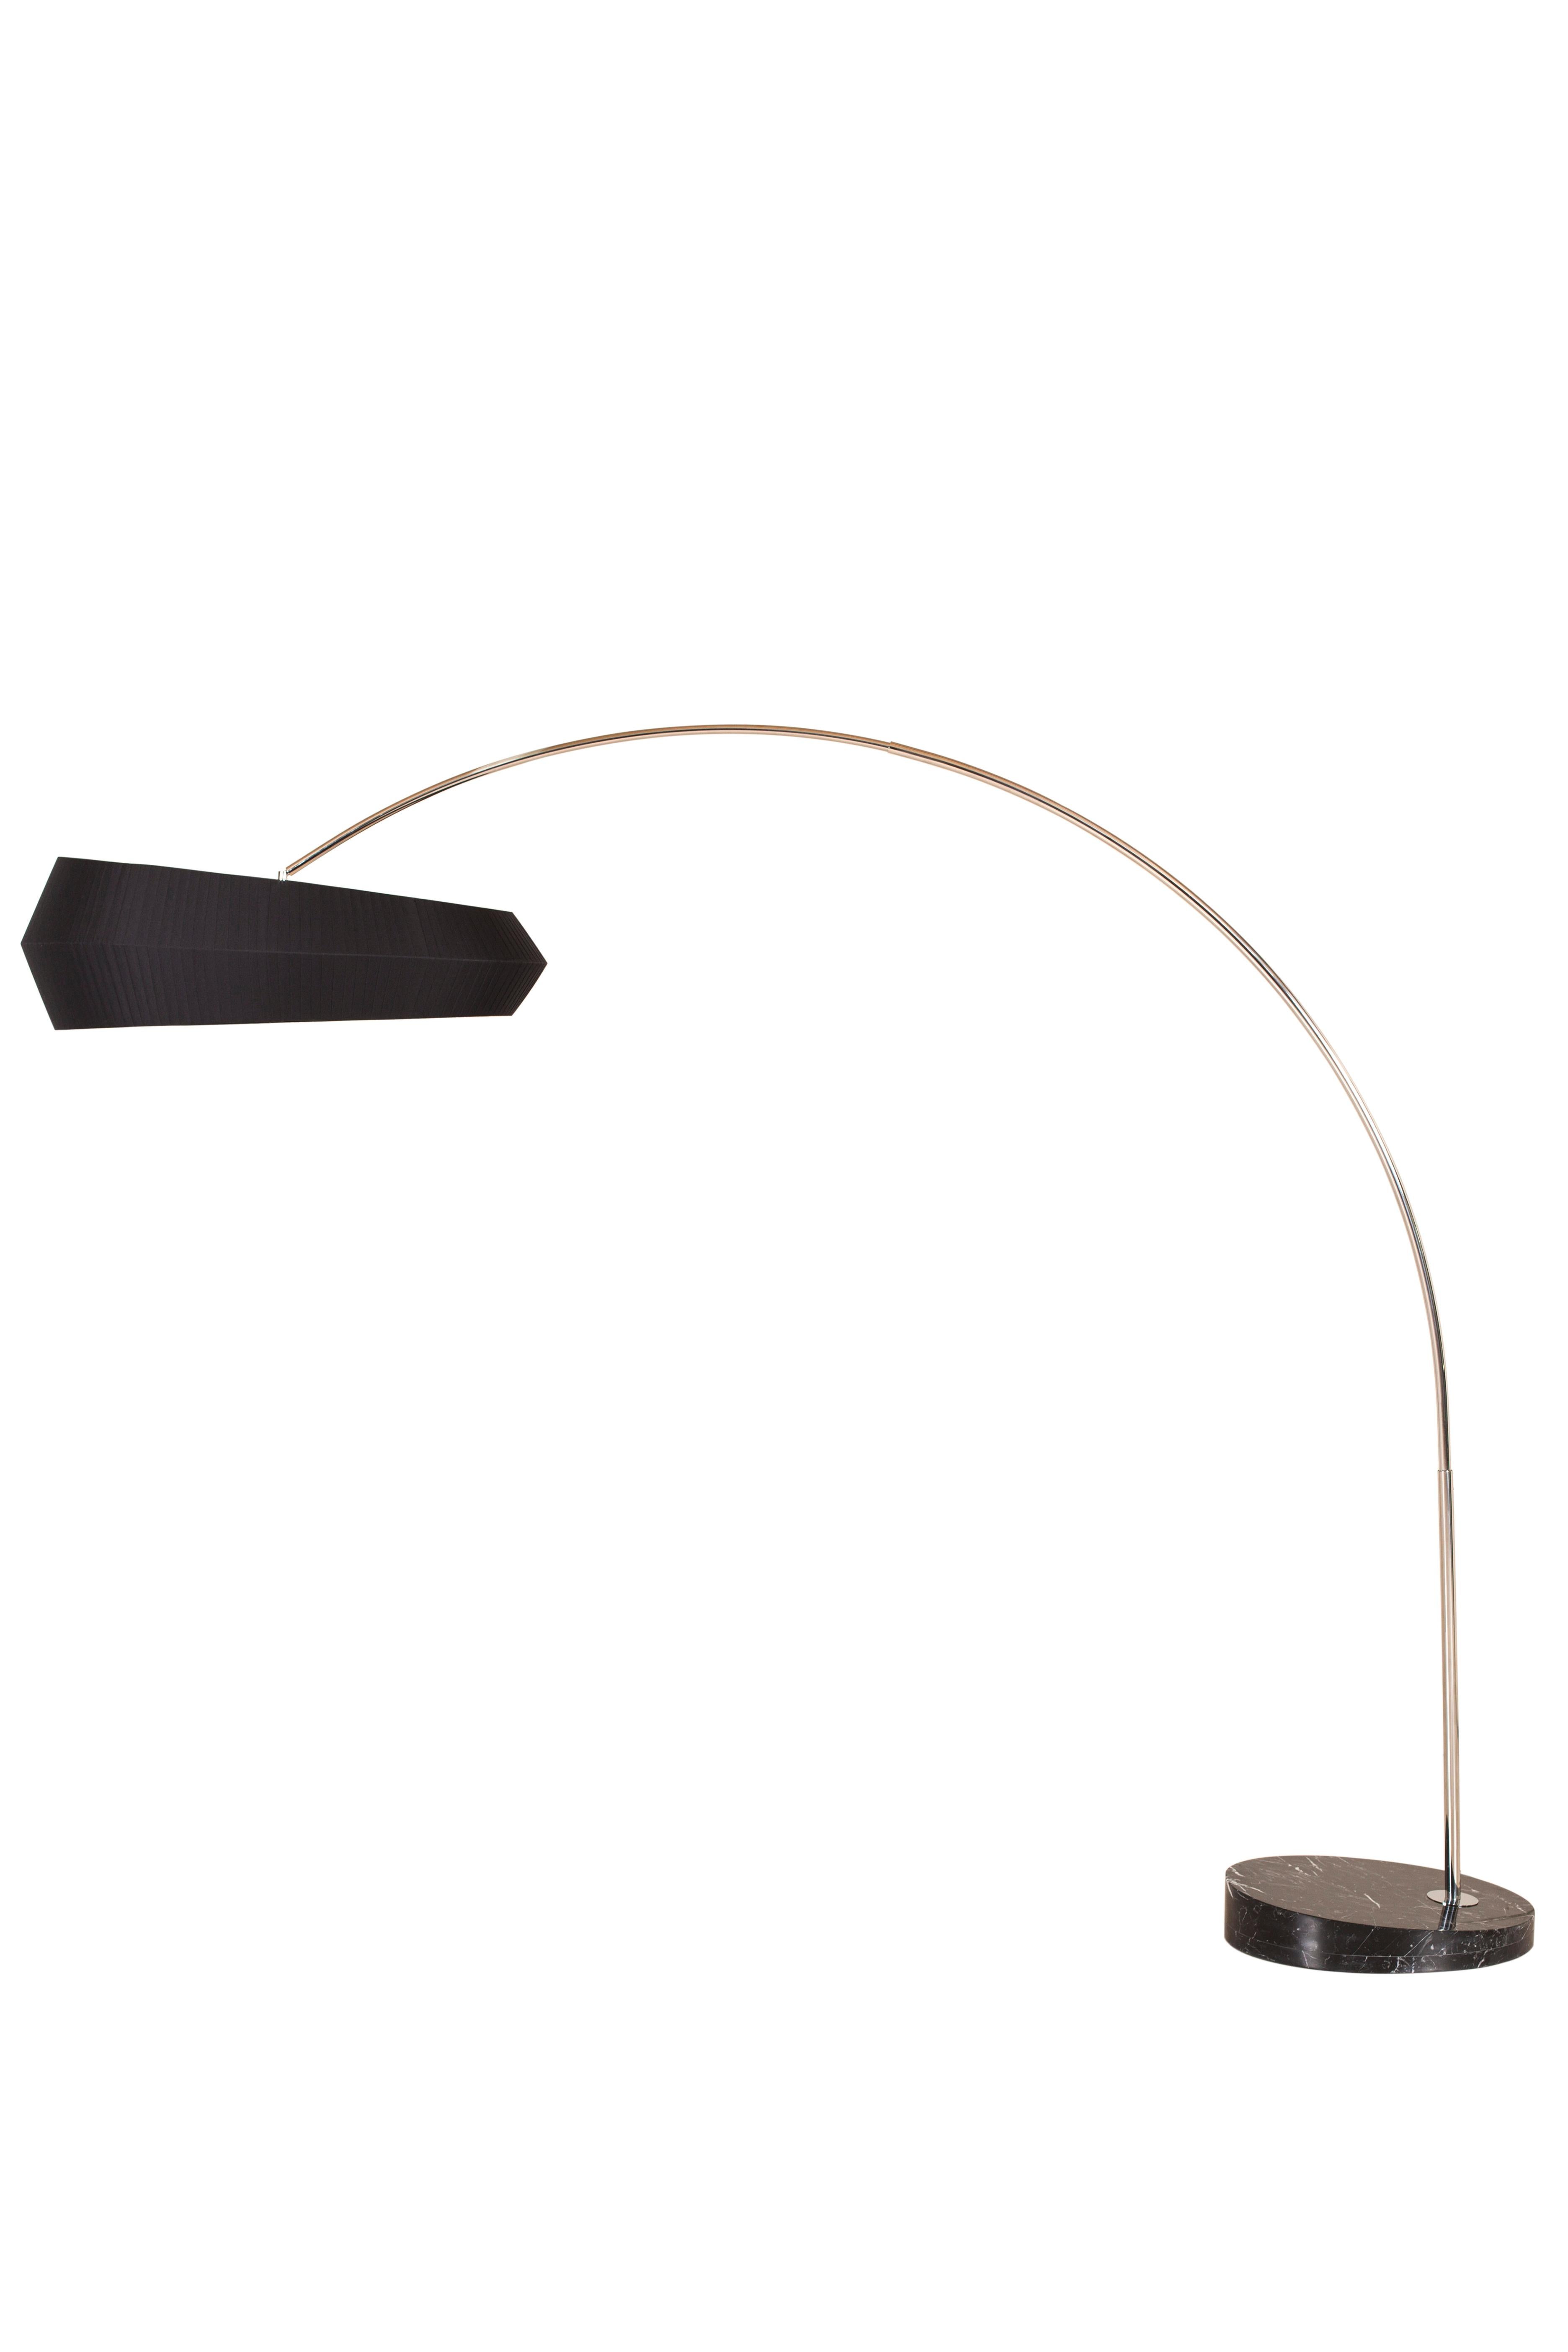 Portuguese Modern Black Sublime Arc Floor Lamp, Marble, Handmade in Portugal by Greenapple For Sale